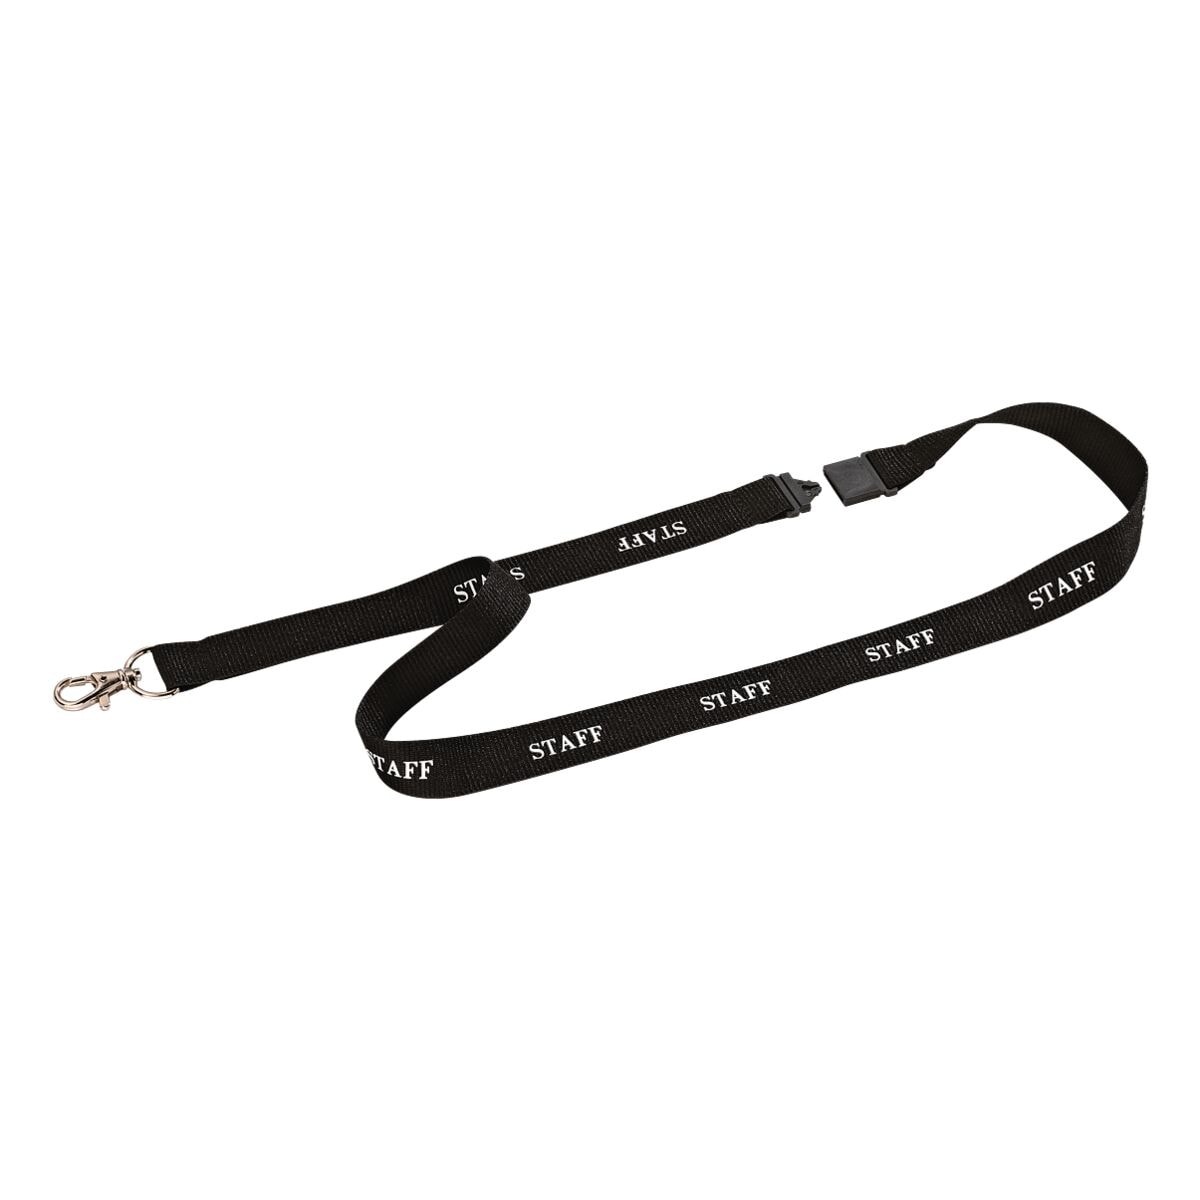 Durable 10er-Pack Textilband STAFF